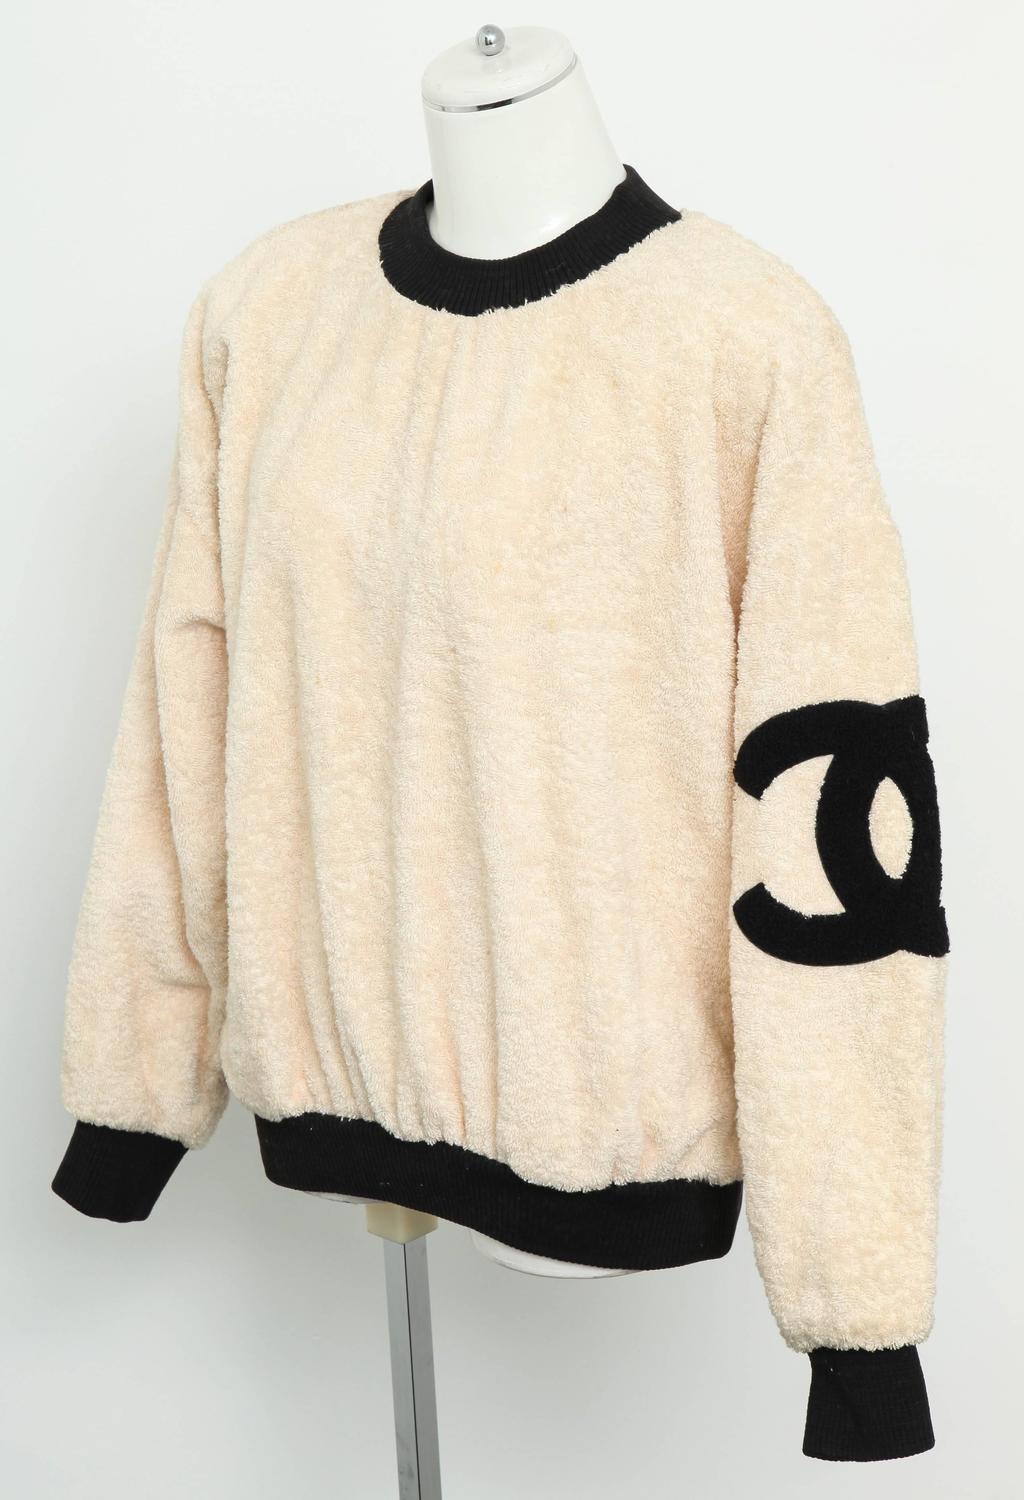 Vintage Chanel Sweat Shirt Sweater with Iconic CC at 1stdibs